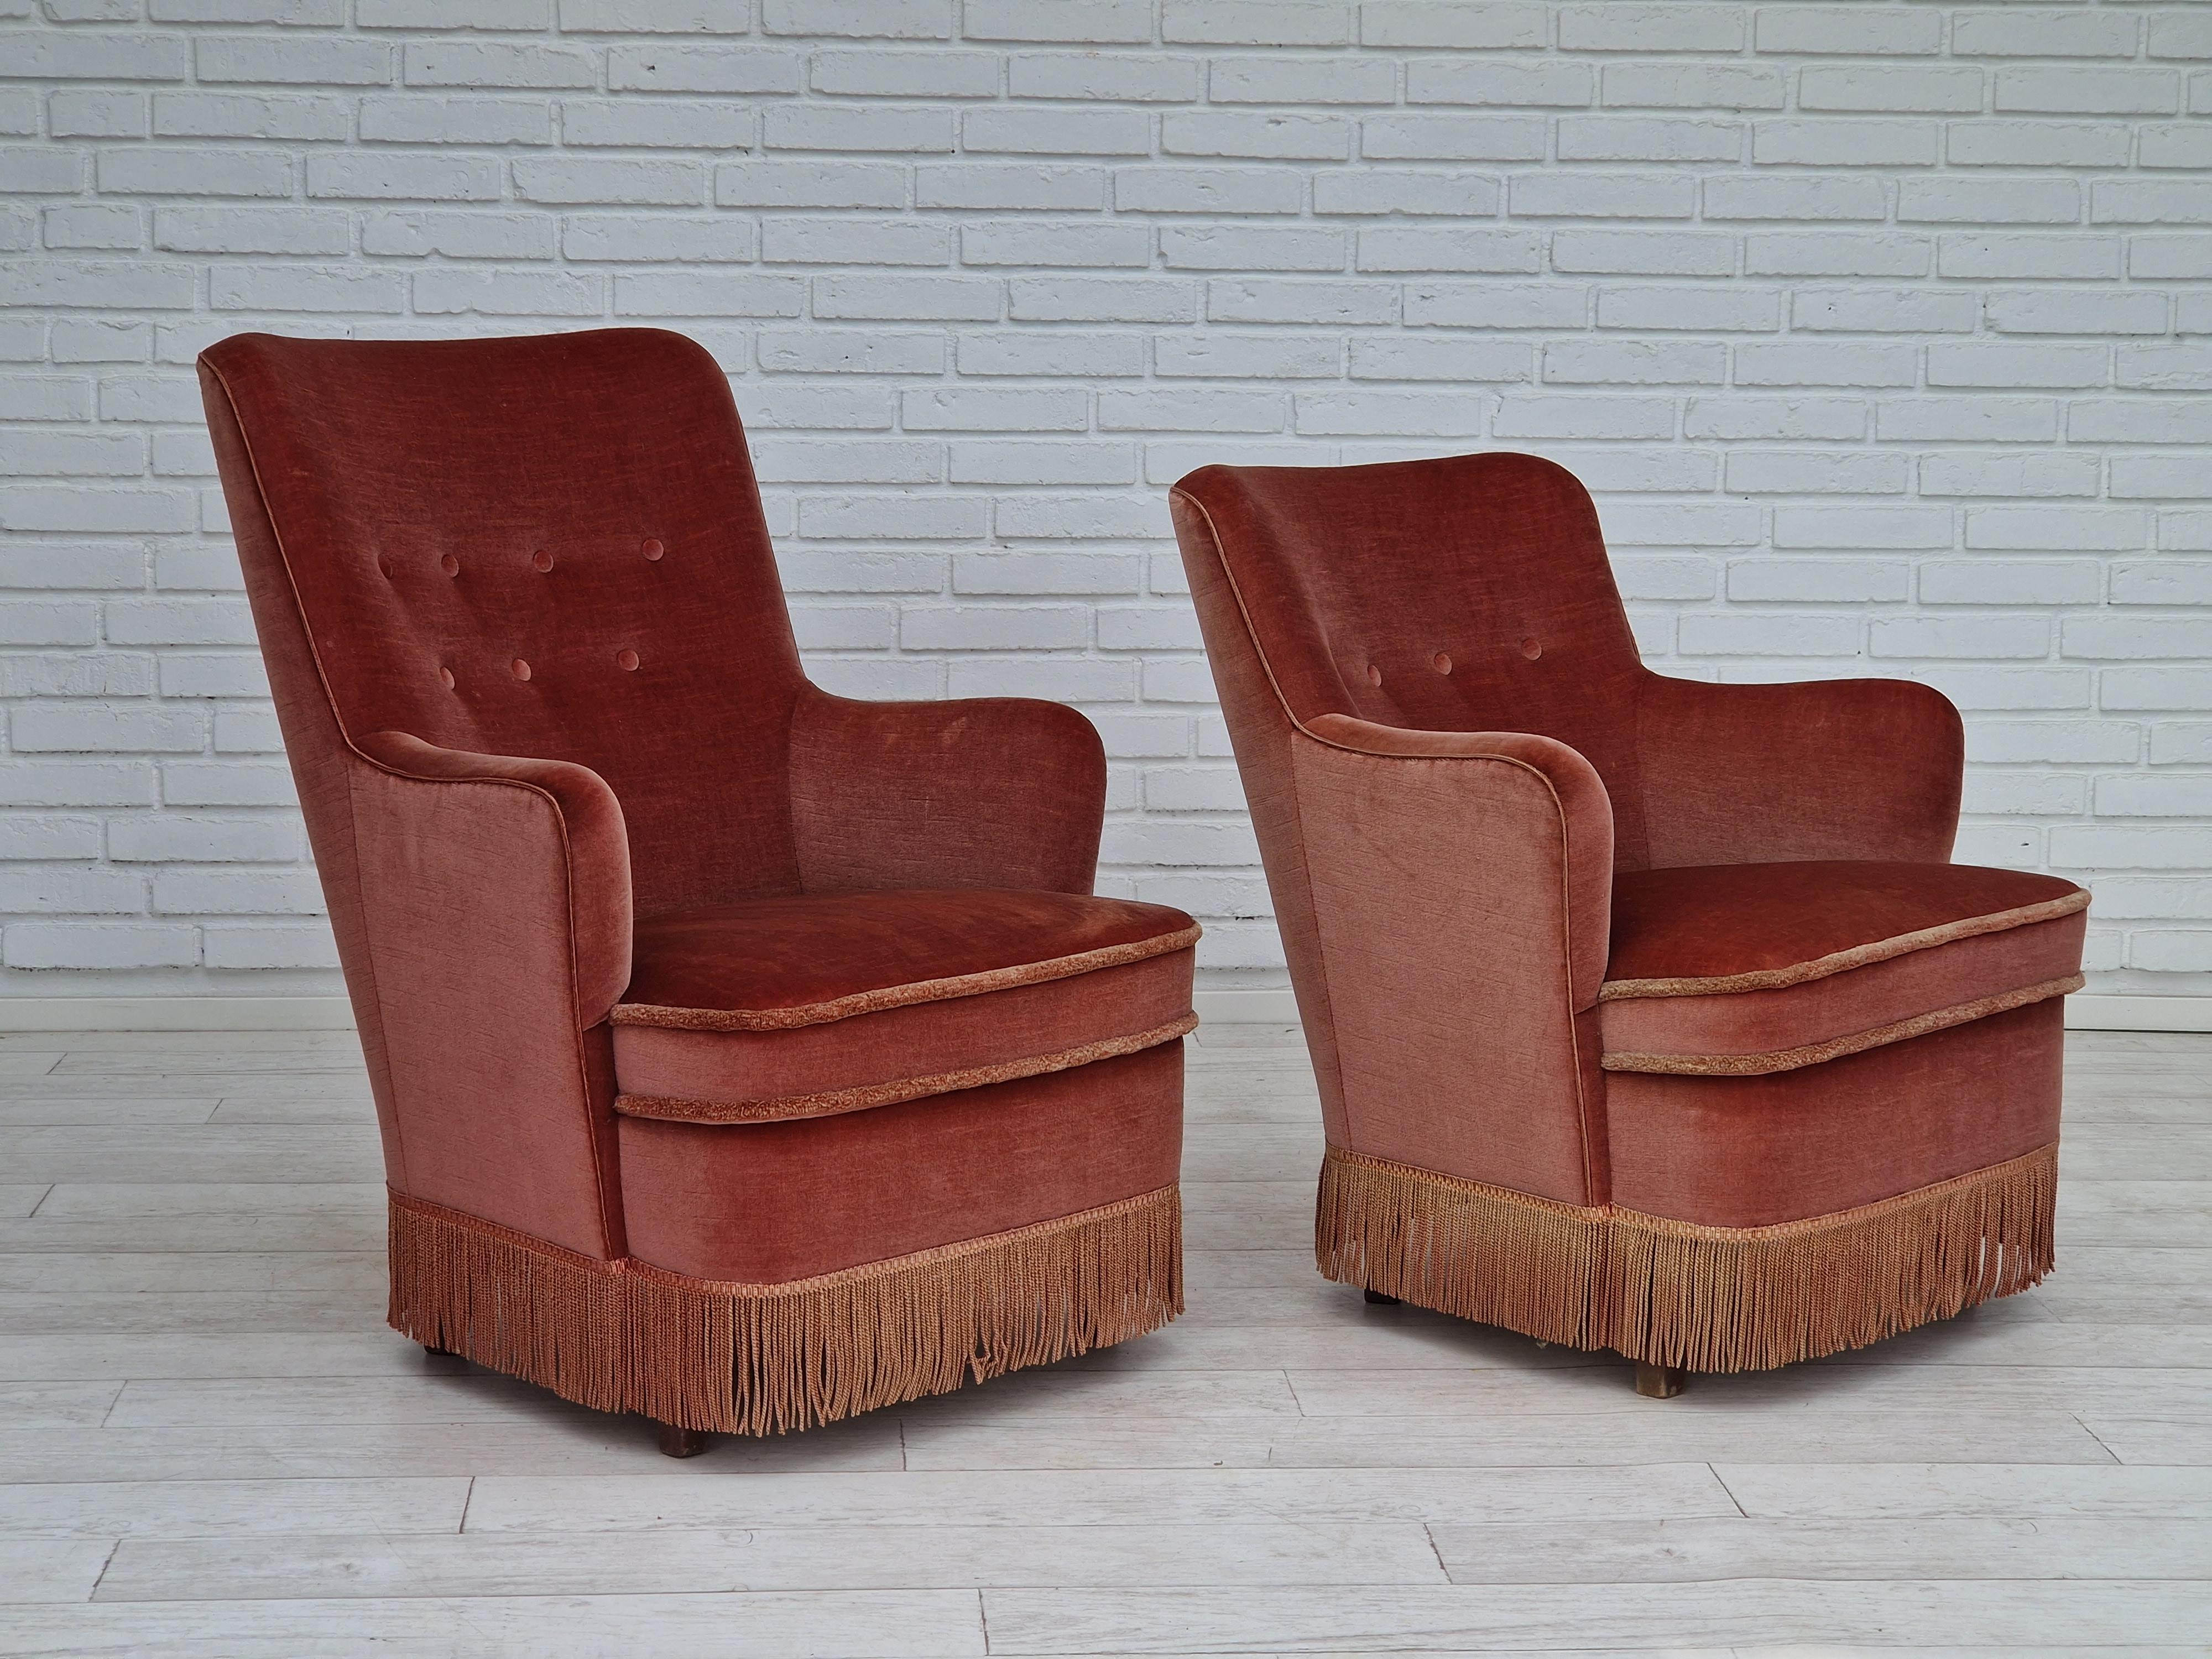 1970s, Danish design. Set of two velour chairs. Original upholstery in light red velour with nice patina, very good condition. Beech wood legs, springs in the seat. No smells, no stains. Made in about 1970 by Danish furniture manufacturer. (high of